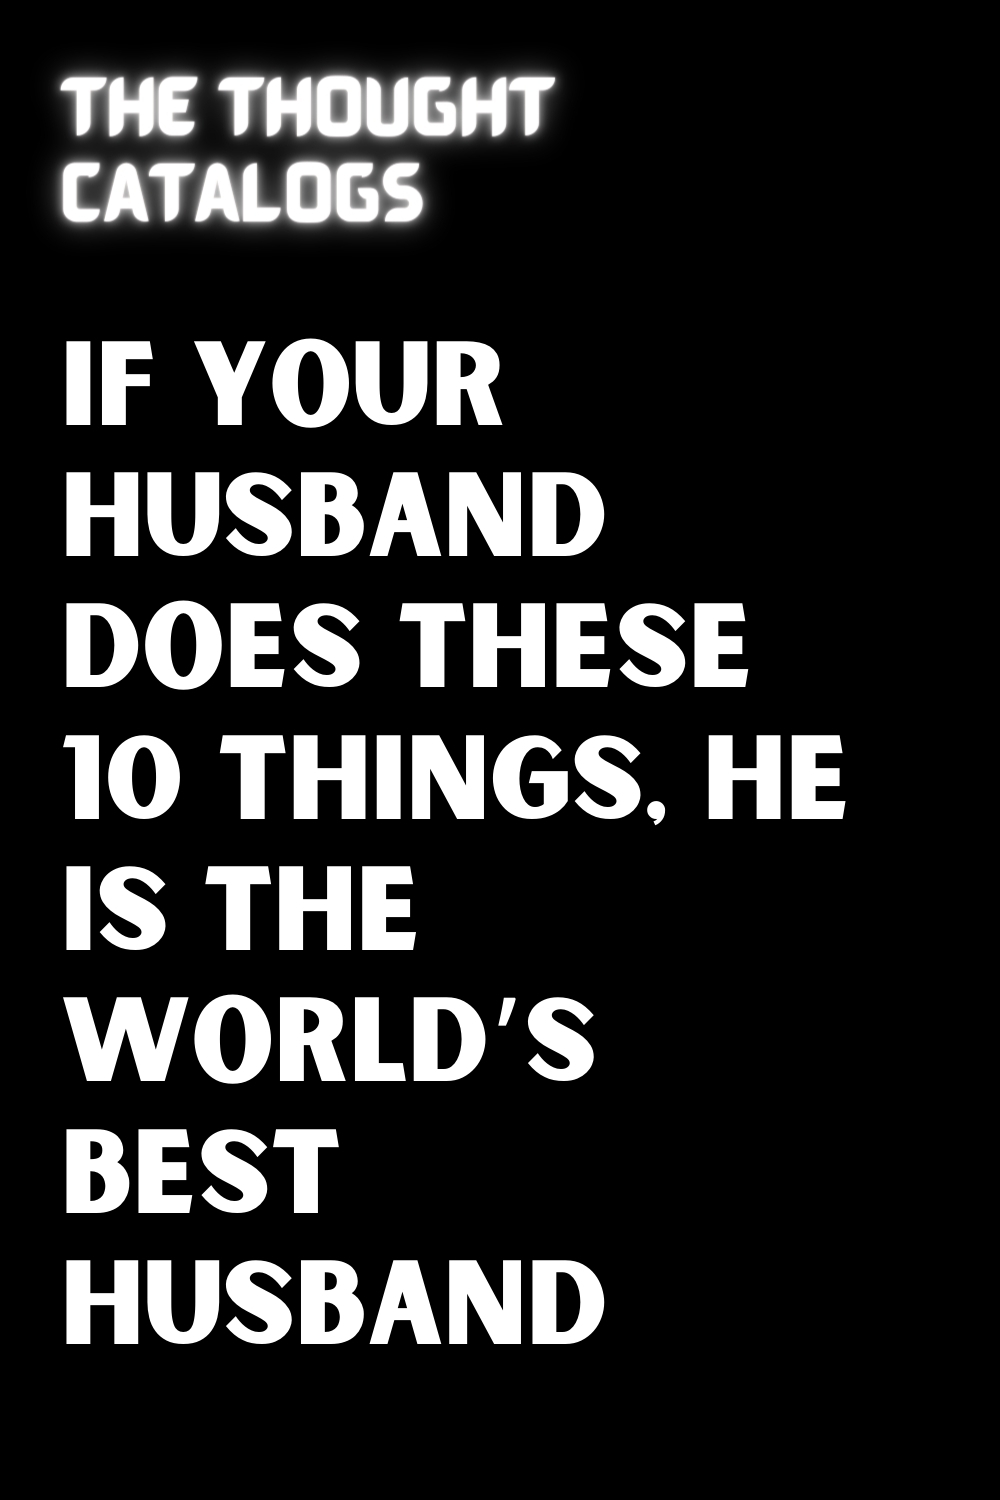 IF YOUR HUSBAND DOES THESE 10 THINGS, HE IS THE WORLD’S BEST HUSBAND